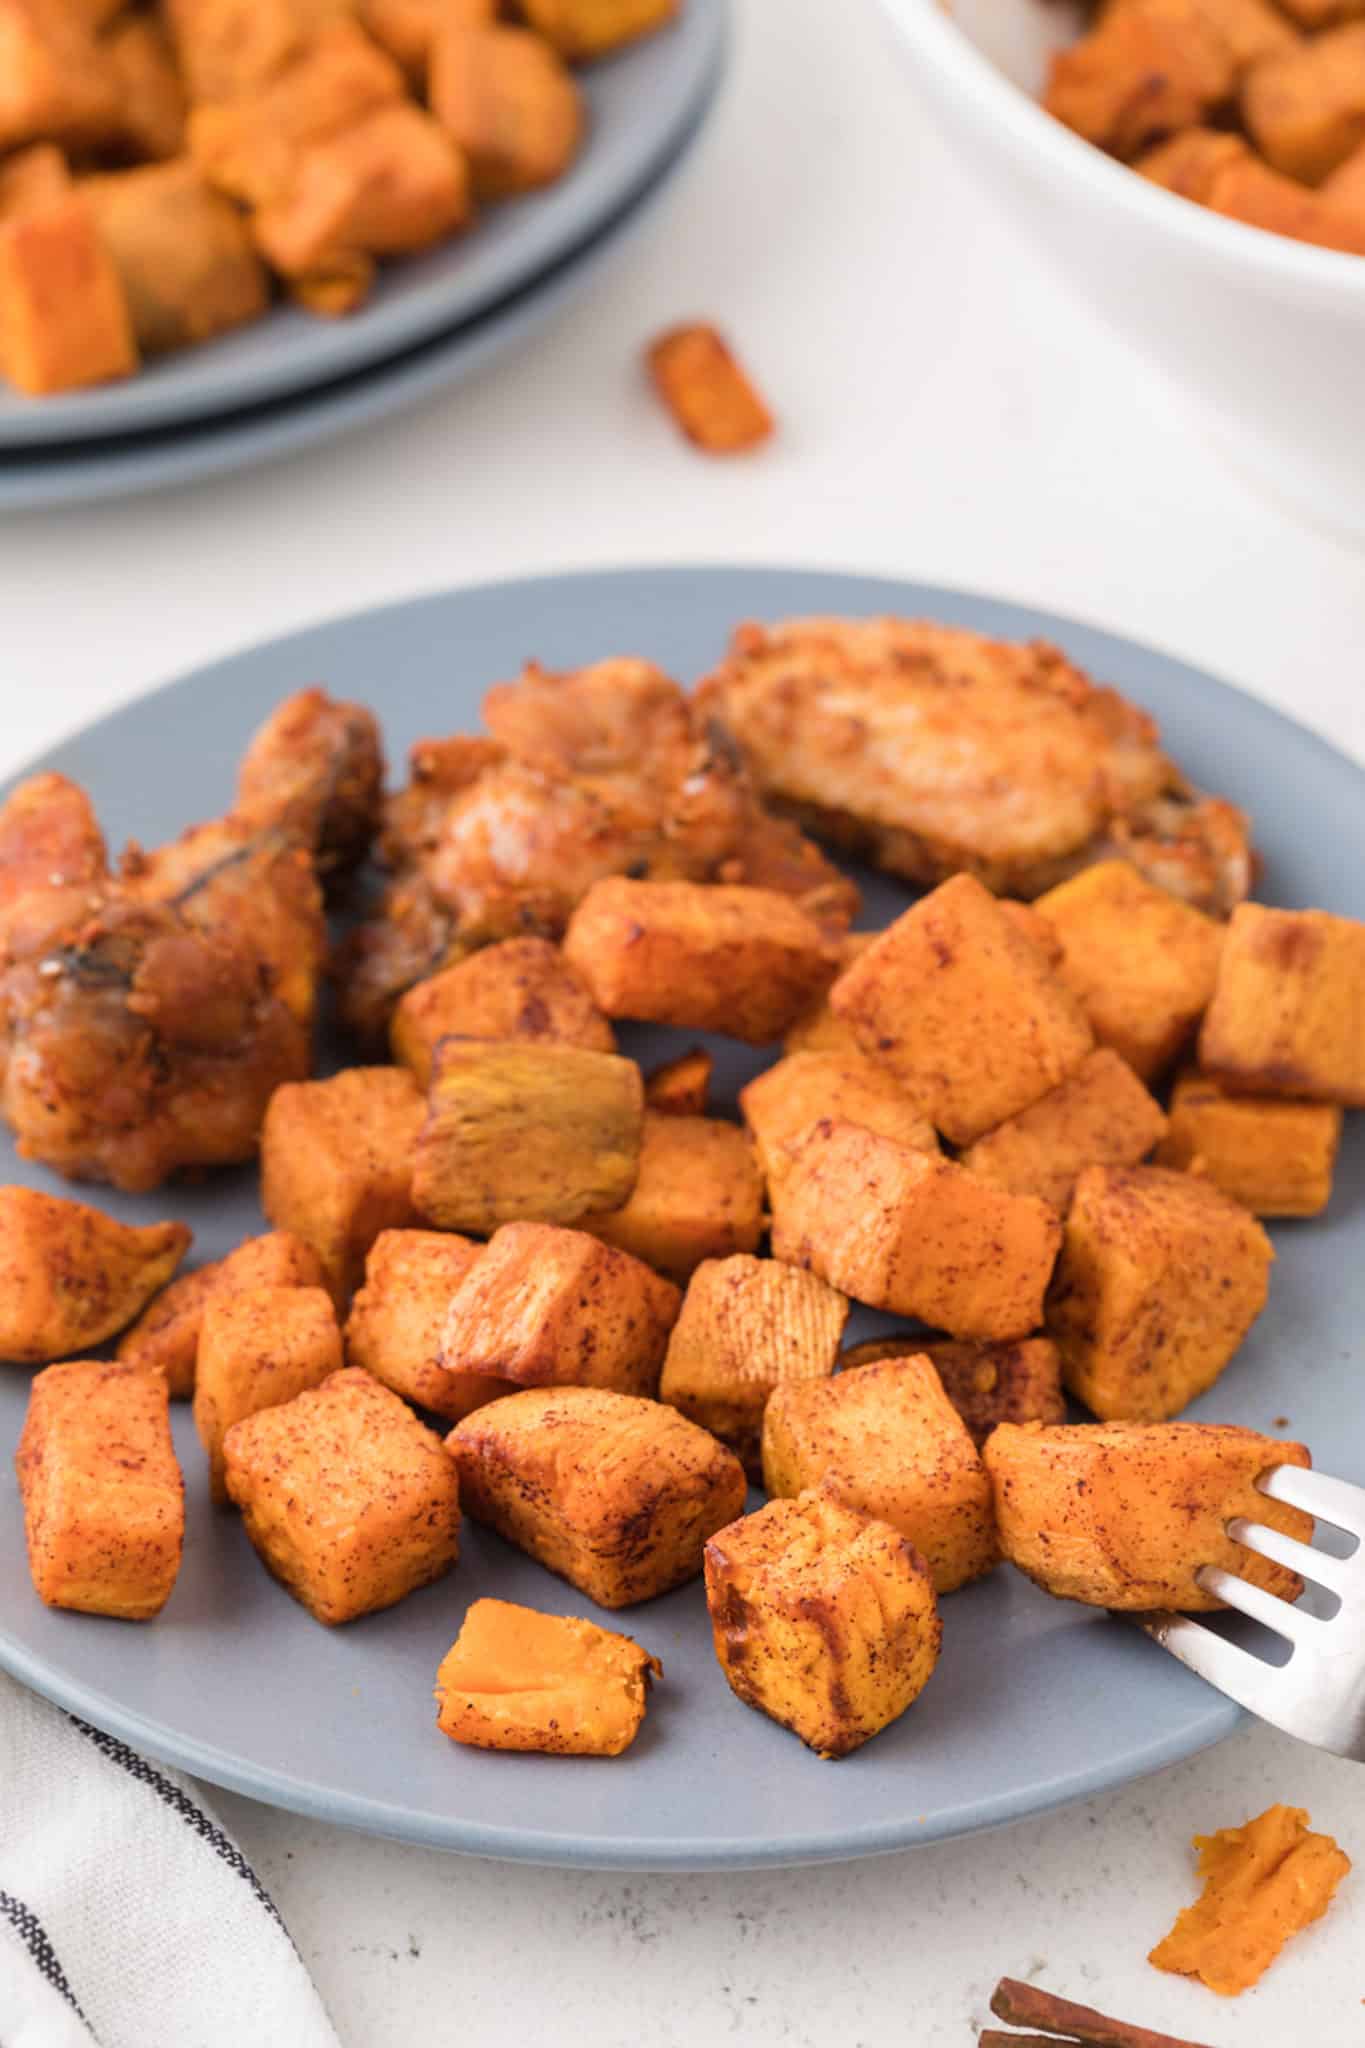 bowl of cooked sweet potato cubes on a blue plate.